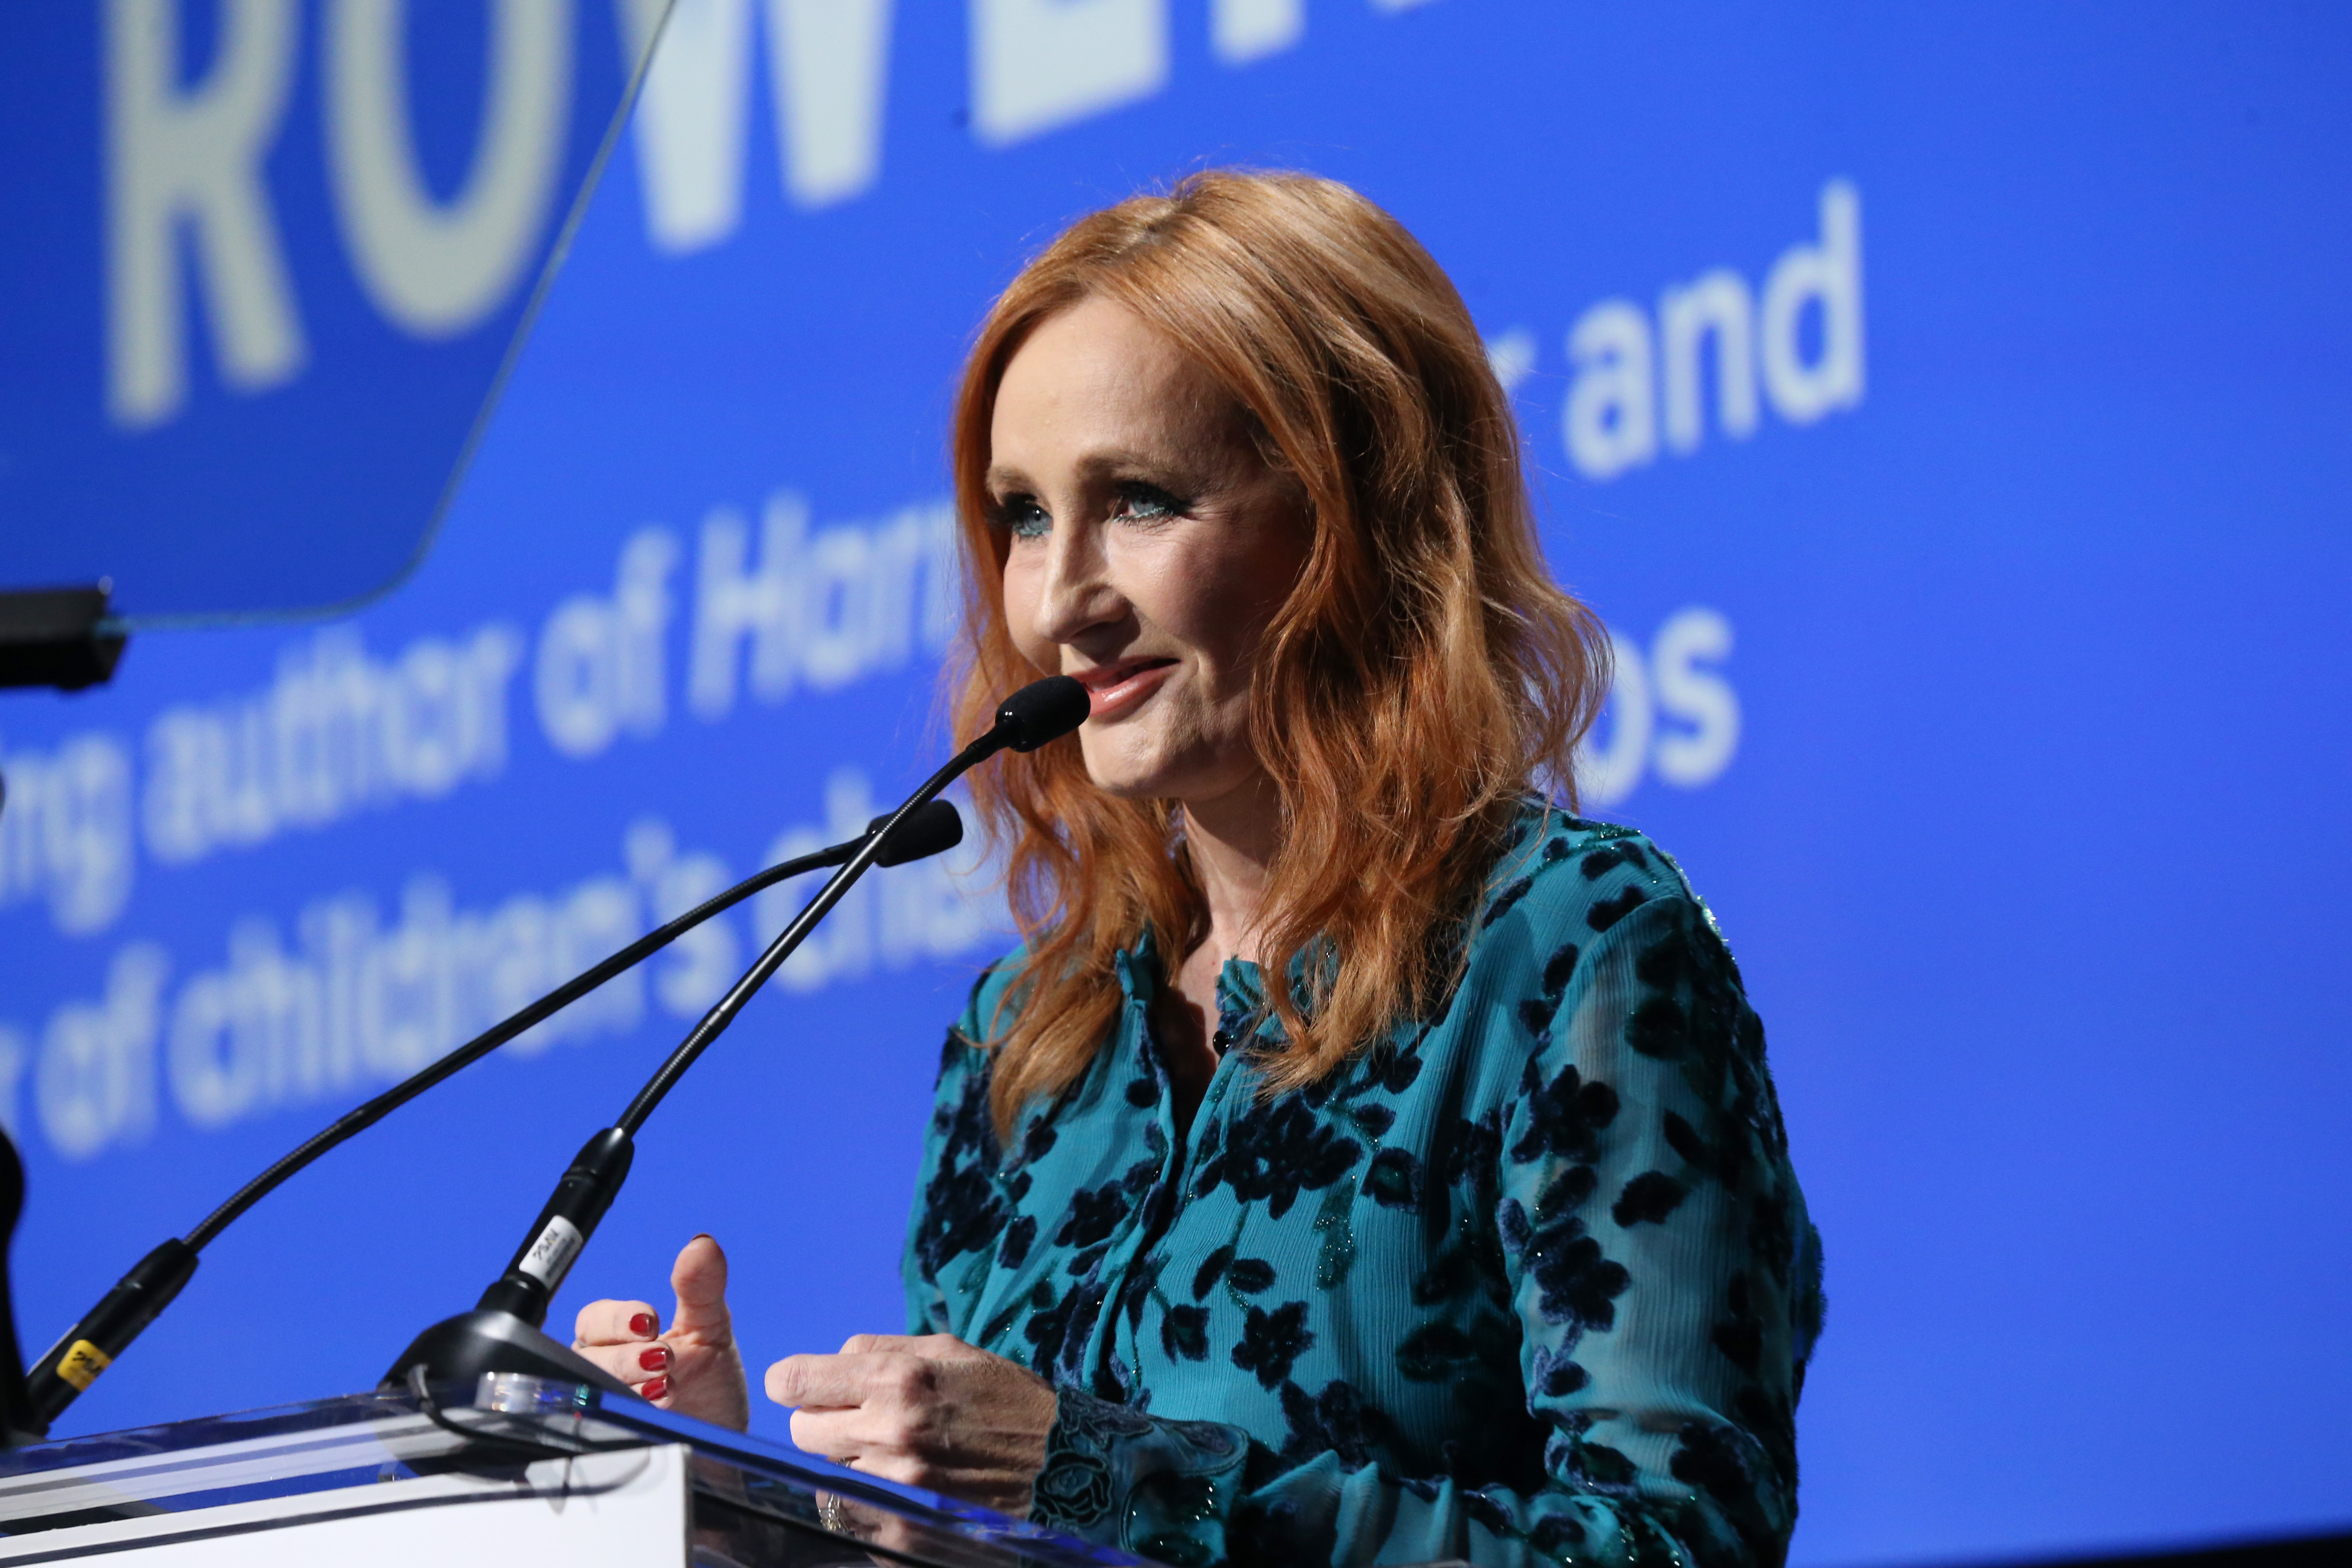 J.K. Rowling accepts an award onstage during the Robert F. Kennedy Human Rights Hosts 2019 Ripple Of Hope Gala & Auction In NYC on December 12, 2019.